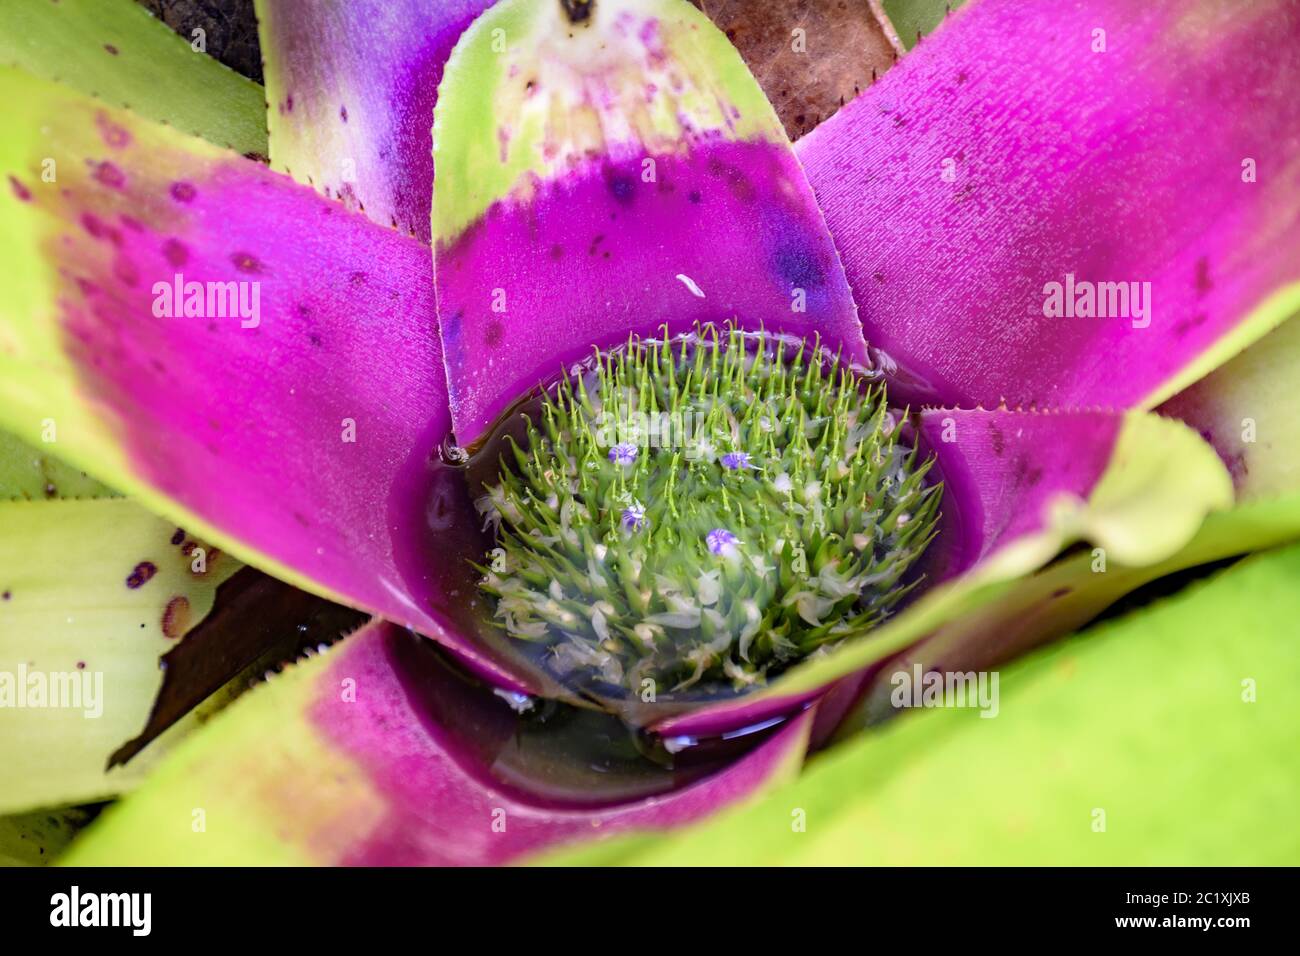 Bromeliad leaves native to the rain forest in Brazil Stock Photo